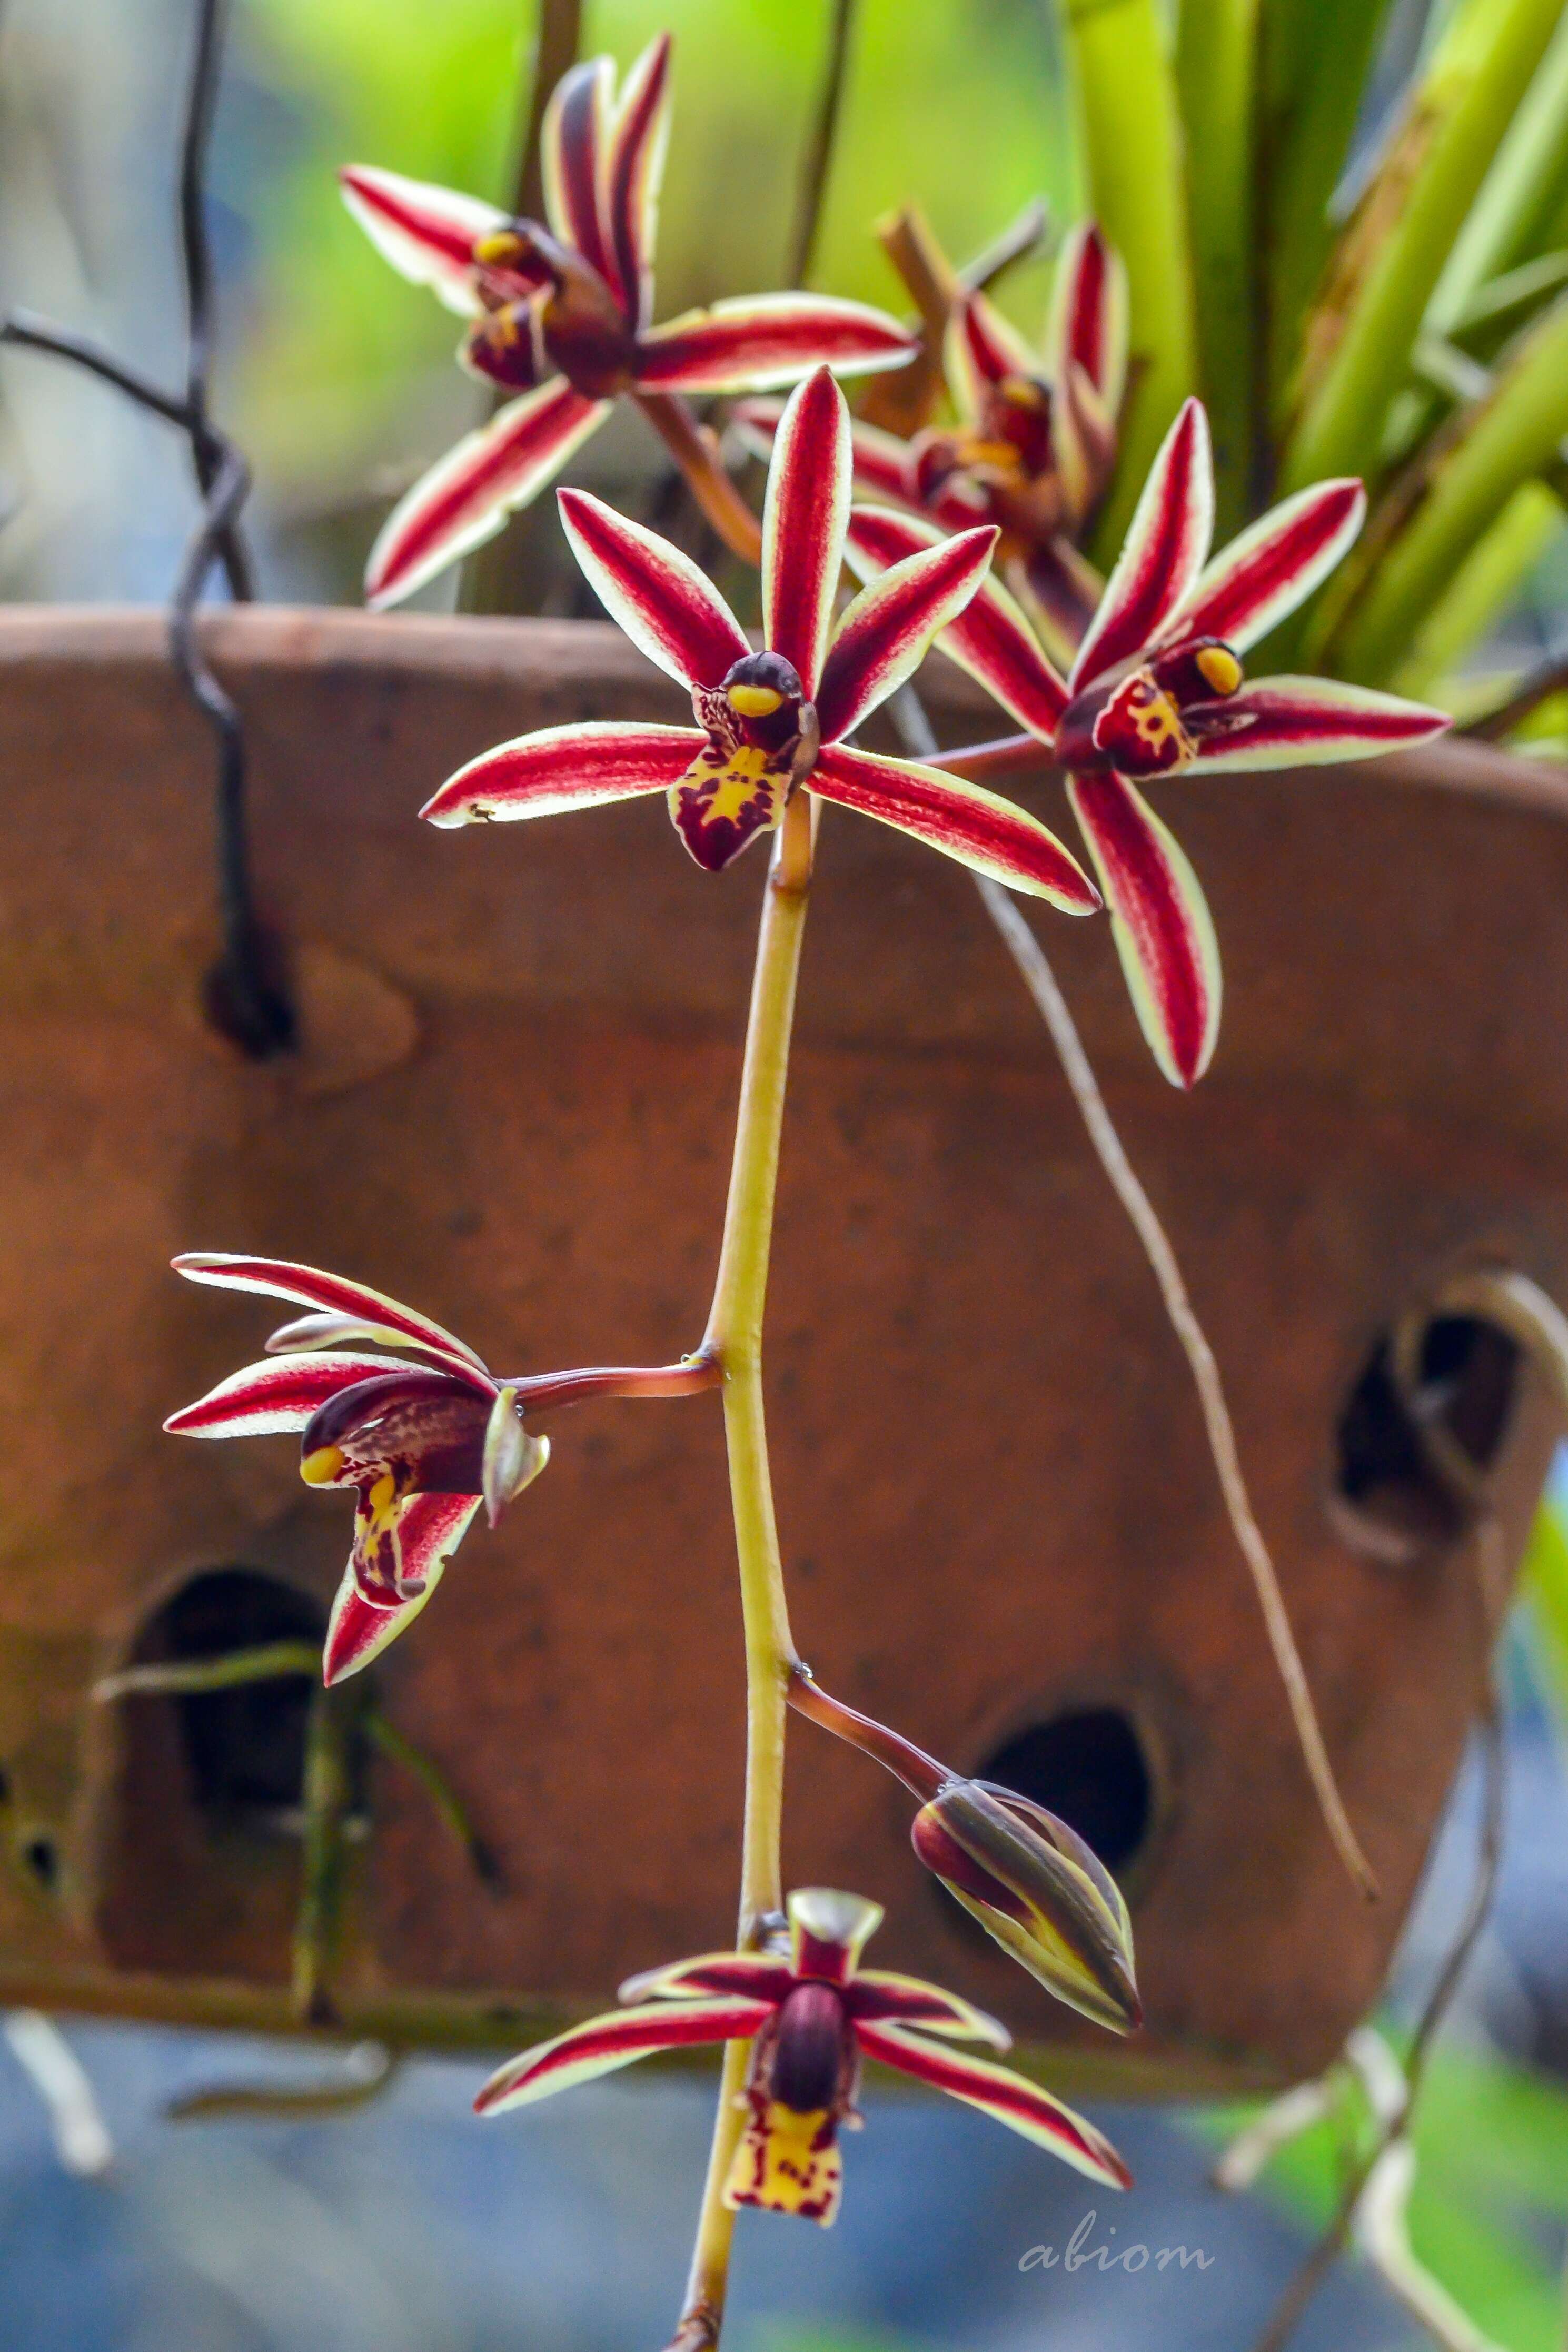 Image of Boat orchids